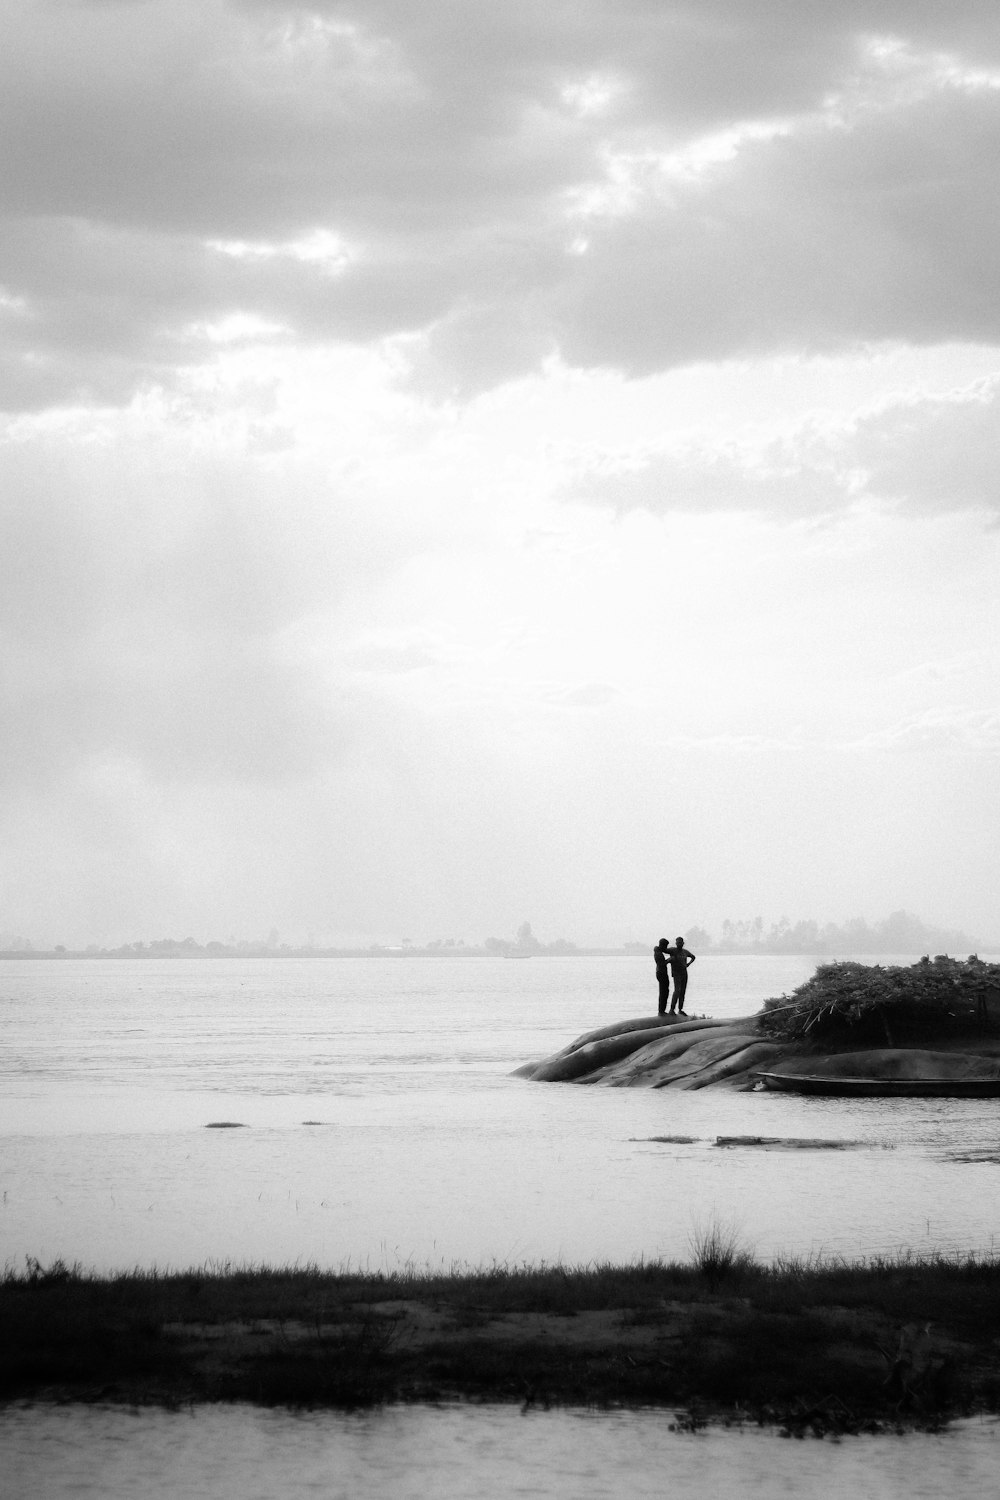 a black and white photo of two people standing on a small island